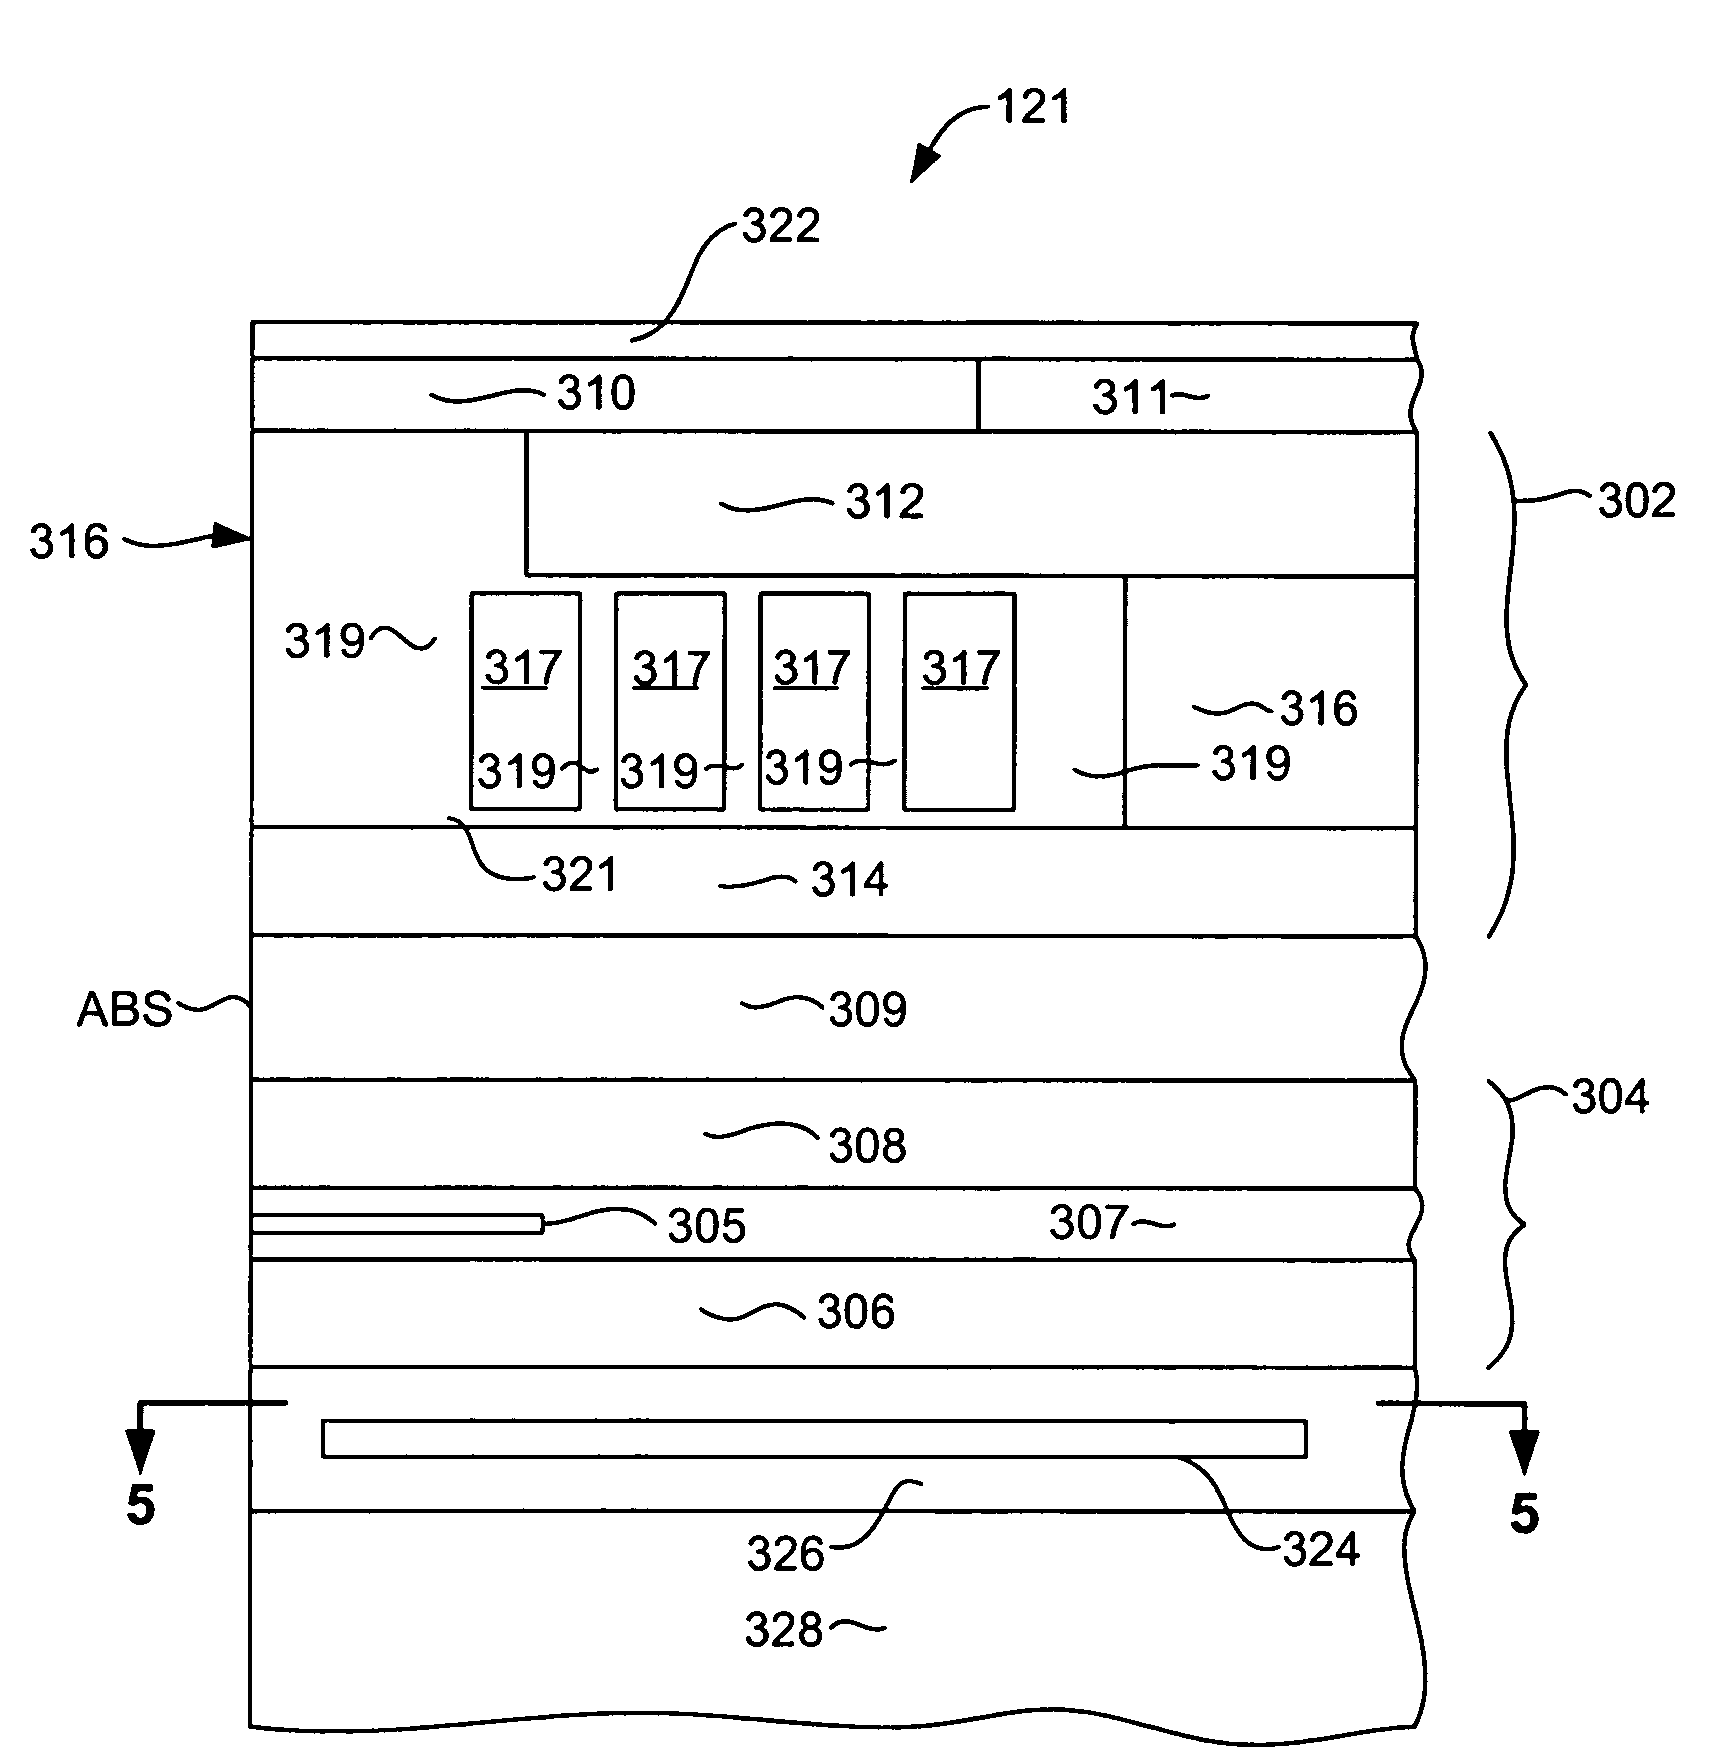 Dual polarity bias for prolonging the life of a heating element in magnetic data storage devices